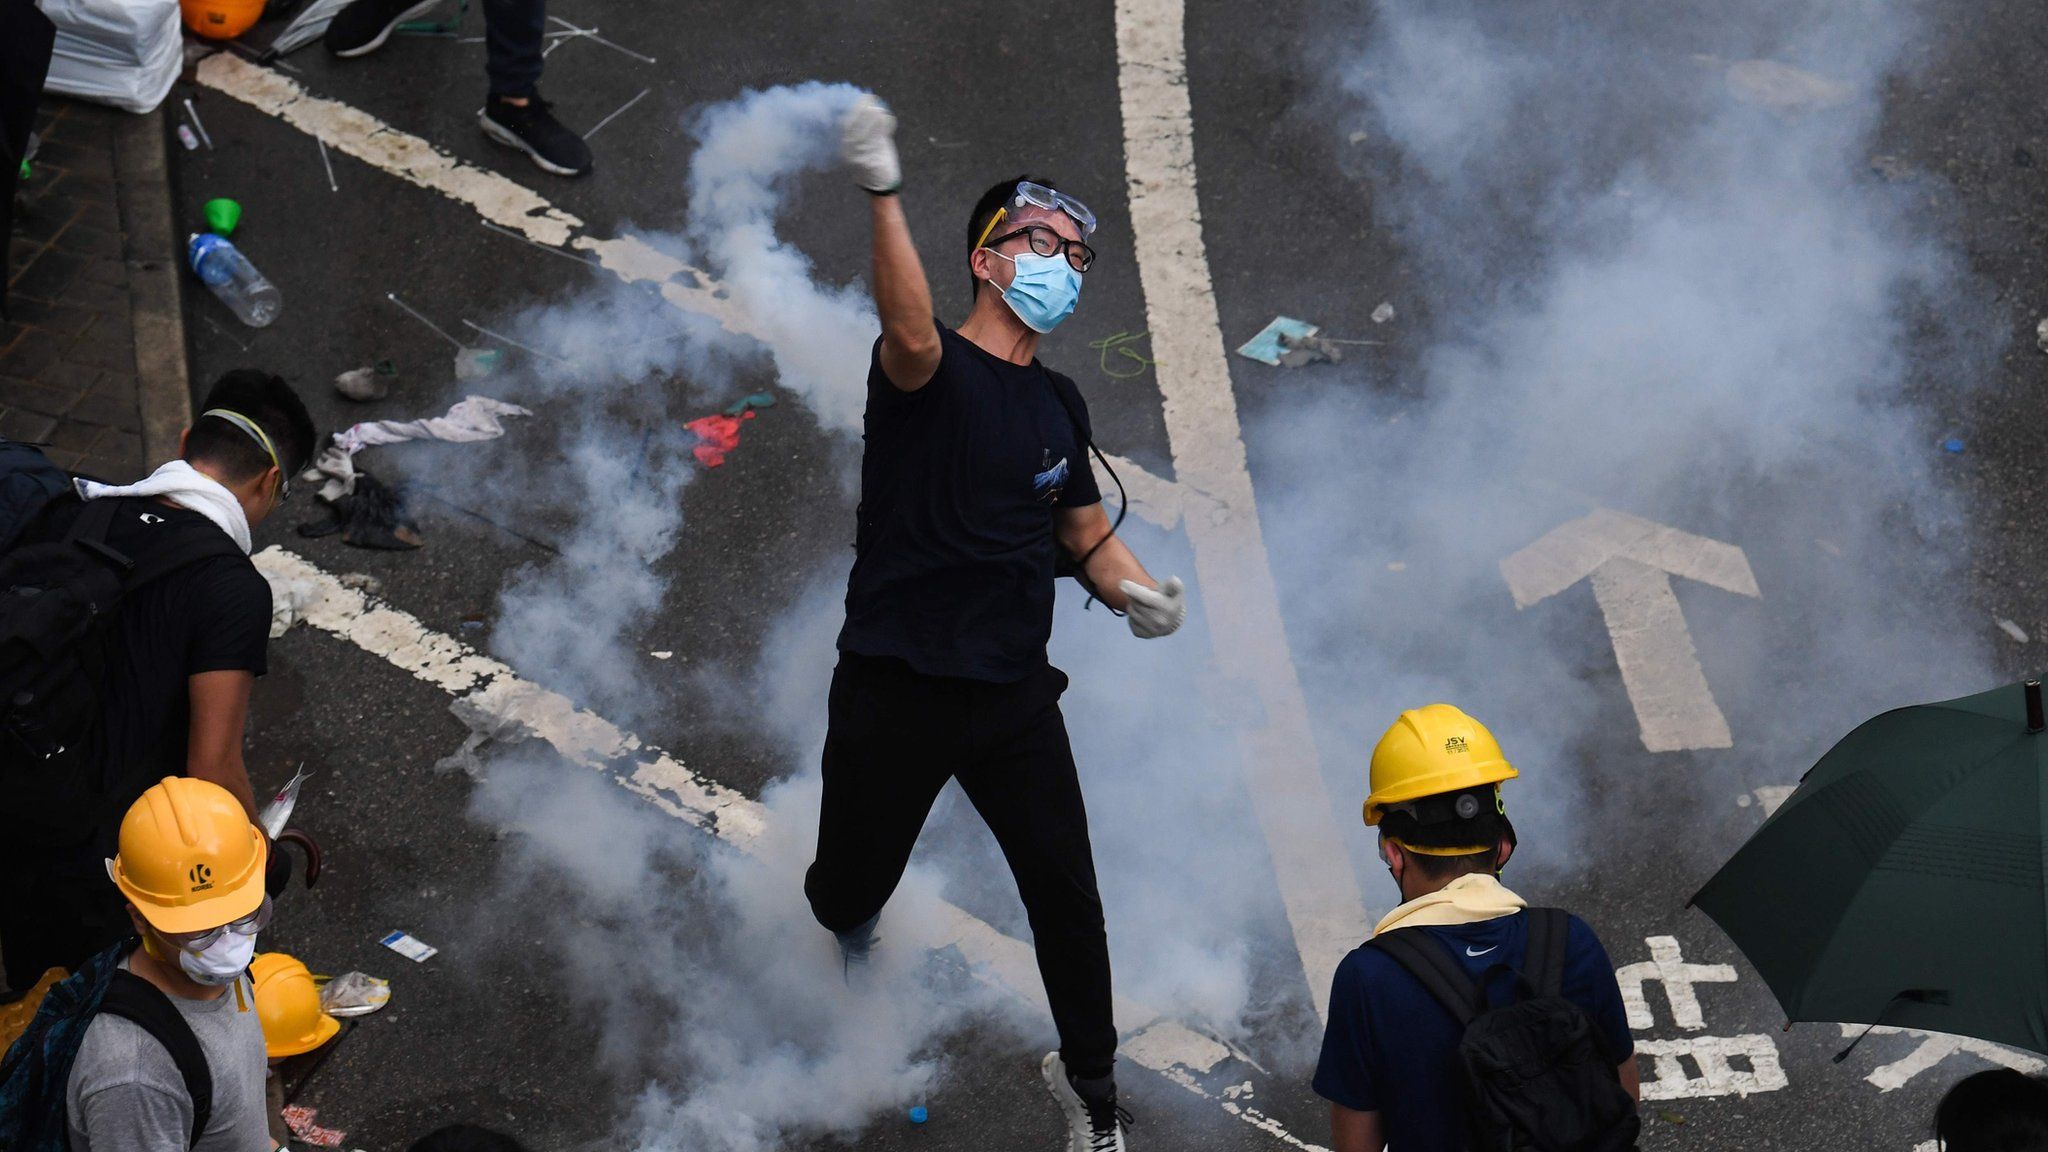 A protester throws back a tear gas during clashes with police outside the government headquarters in Hong Kong on June 12, 2019.